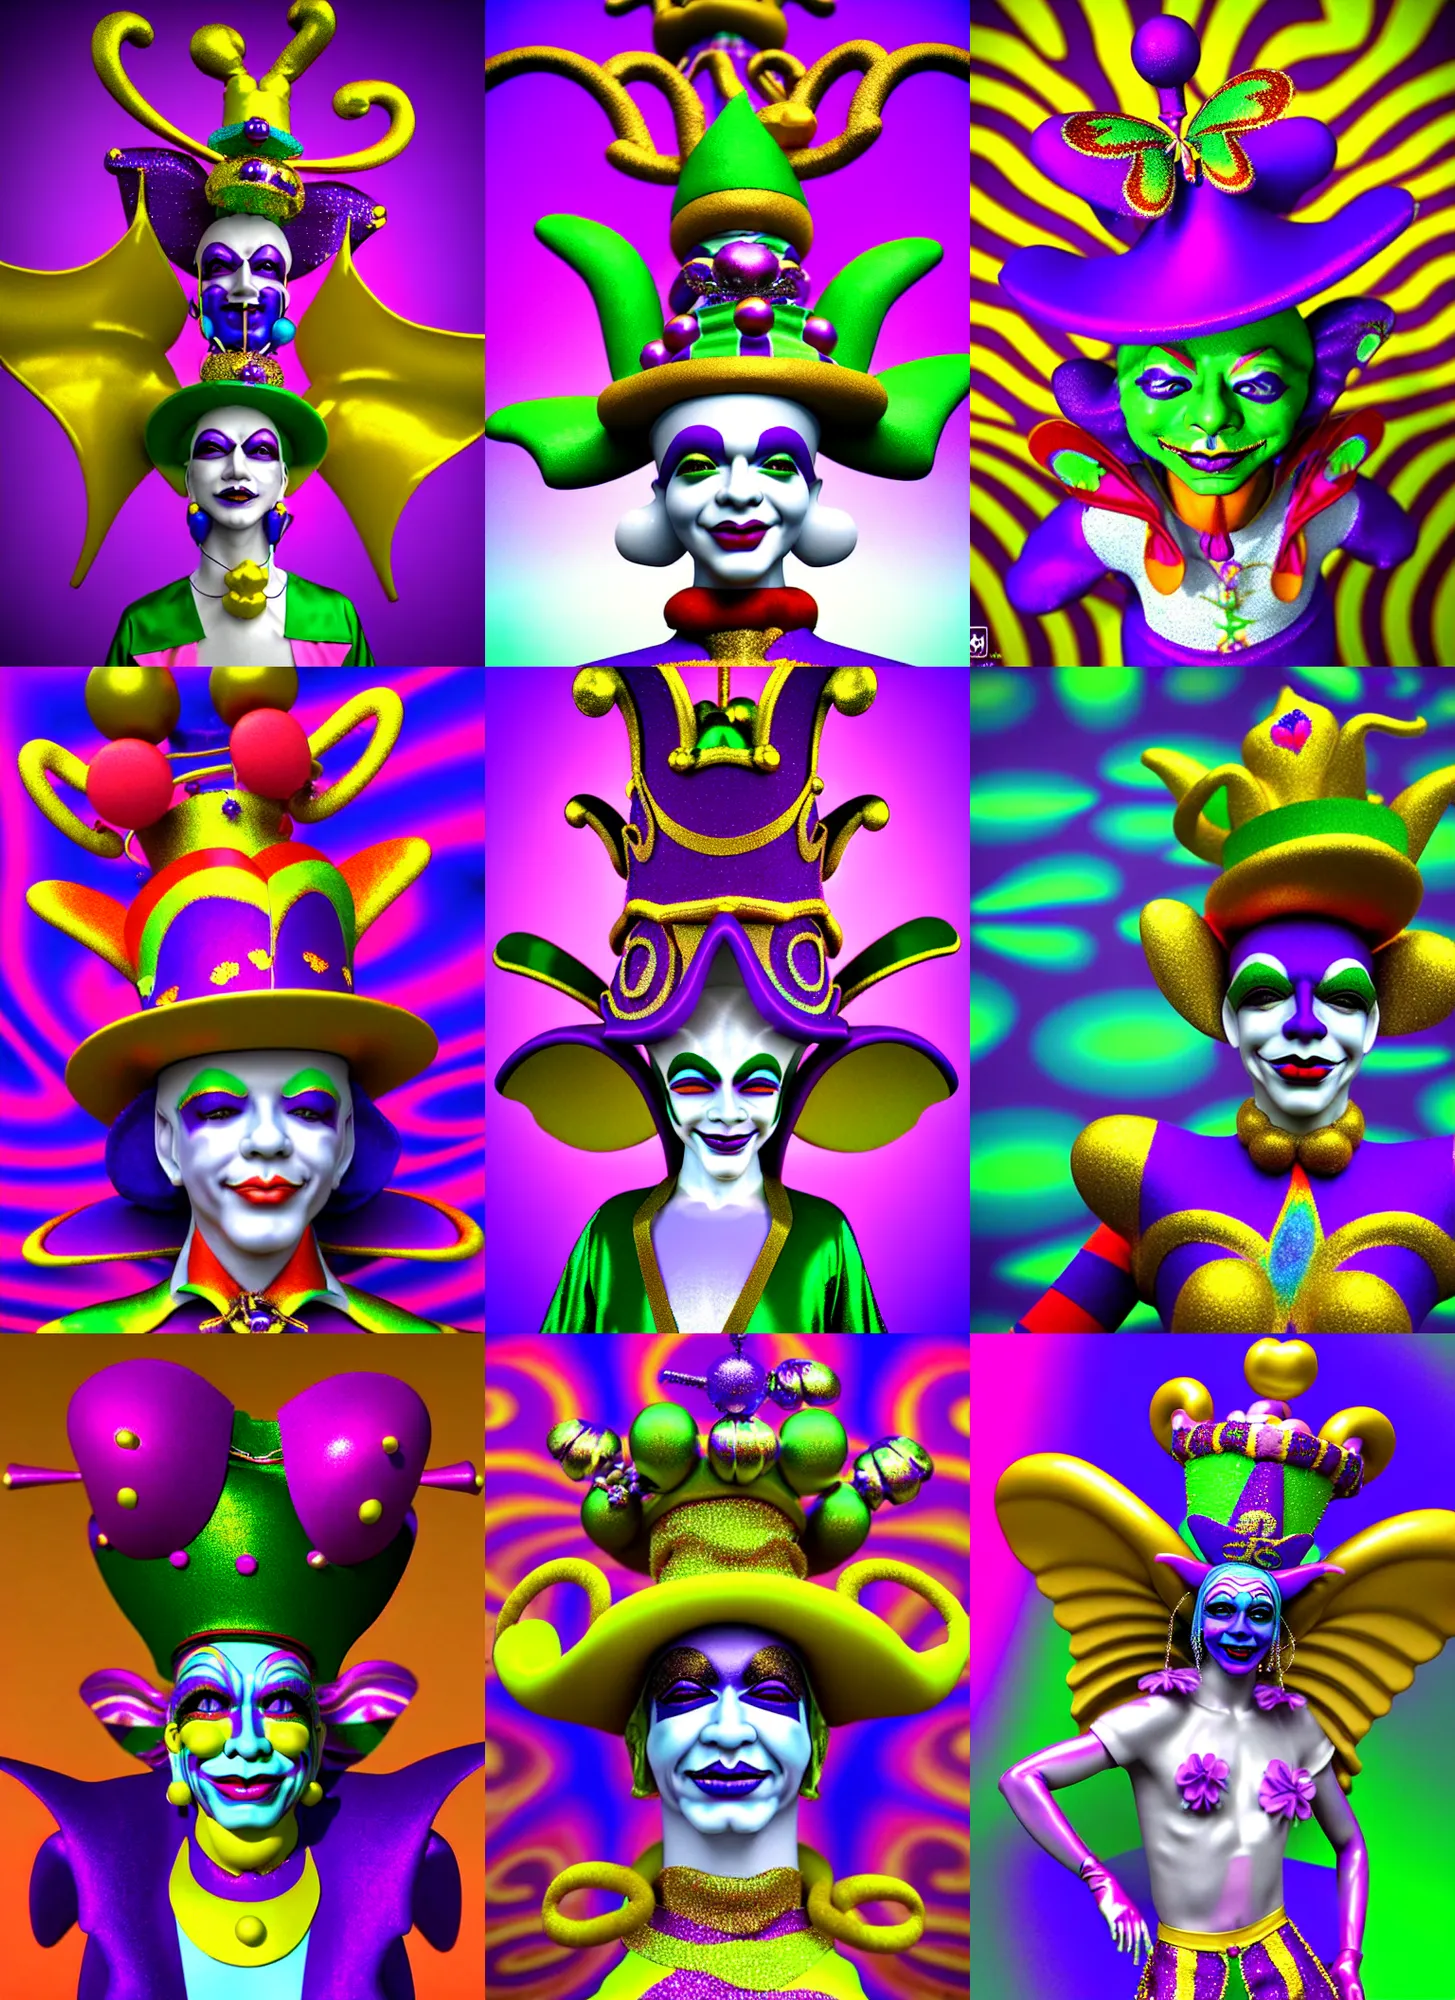 Prompt: 3d render of mardi gras jester doll by Ichiro Tanida wearing a jester hat and wearing angel wings against a psychedelic swirly background with 3d butterflies and 3d flowers n the style of 1990's CG graphics 3d rendered y2K aesthetic by Ichiro Tanida, 3DO magazine